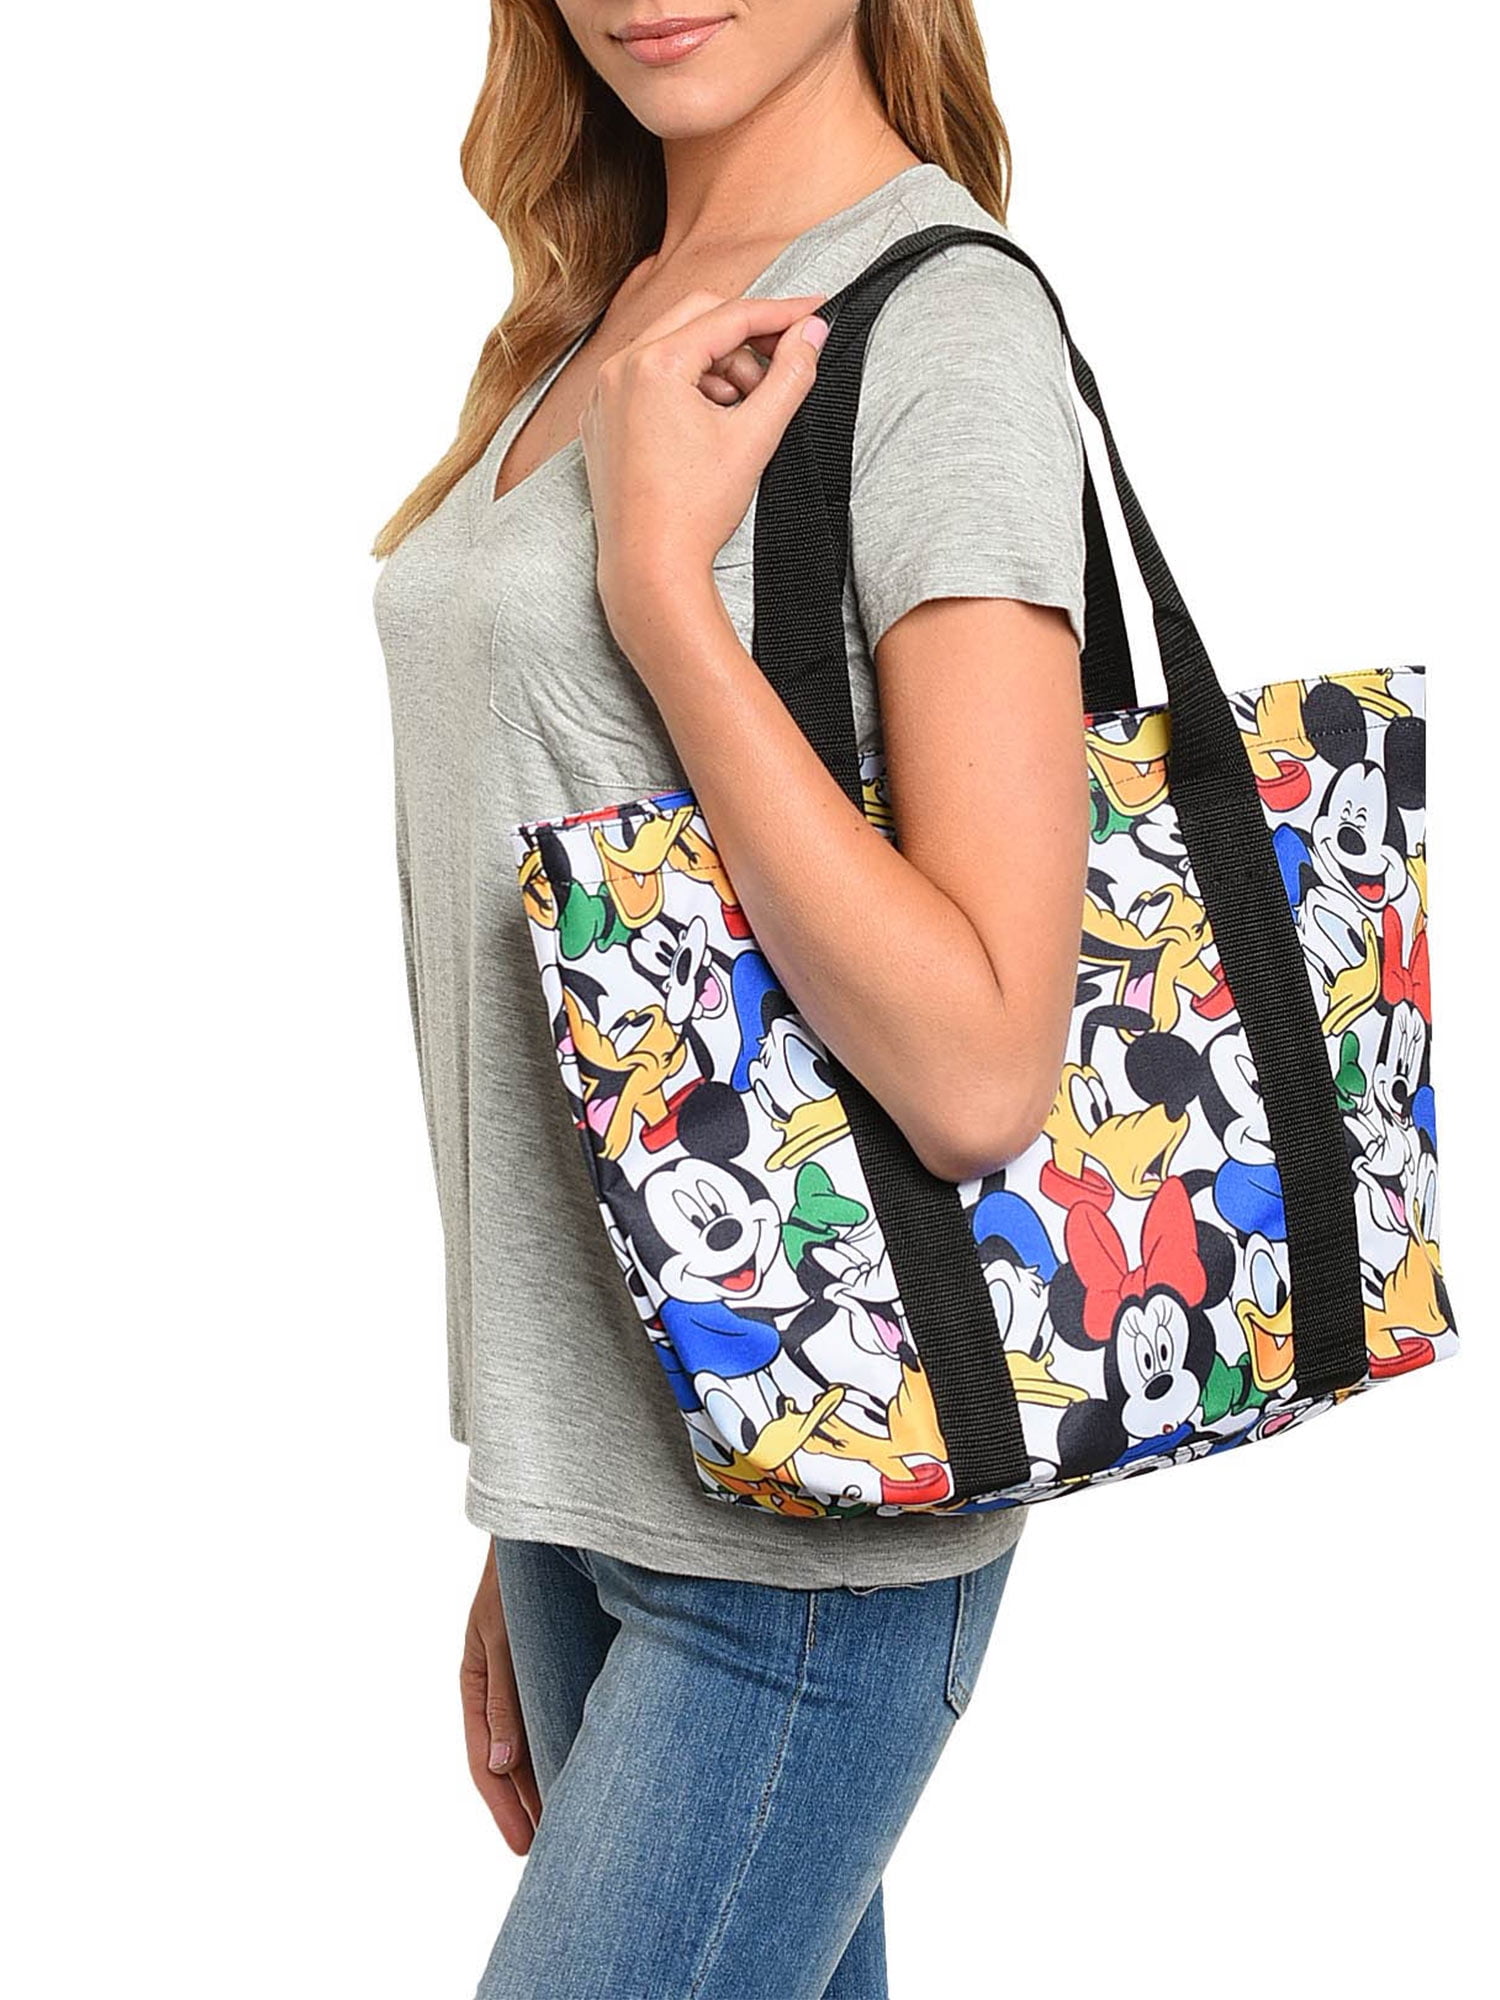 Details about   DISNEY STORE LARGE MICKEY & MINNIE MOUSE CANVAS TOTE BAG NWT 